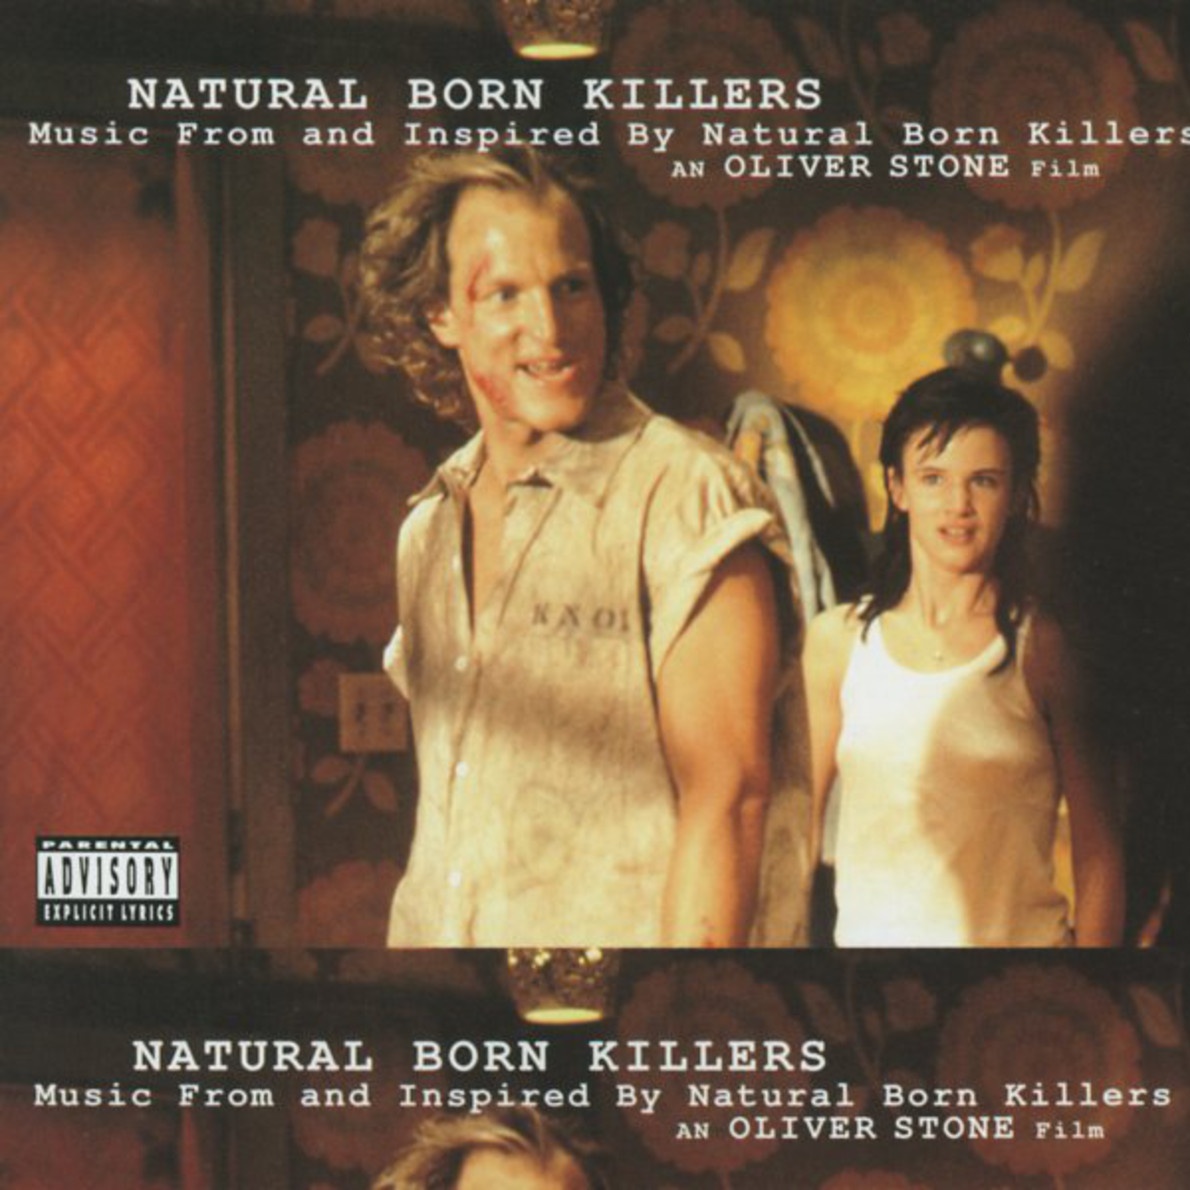 Shitlist - From "Natural Born Killers" Soundtrack